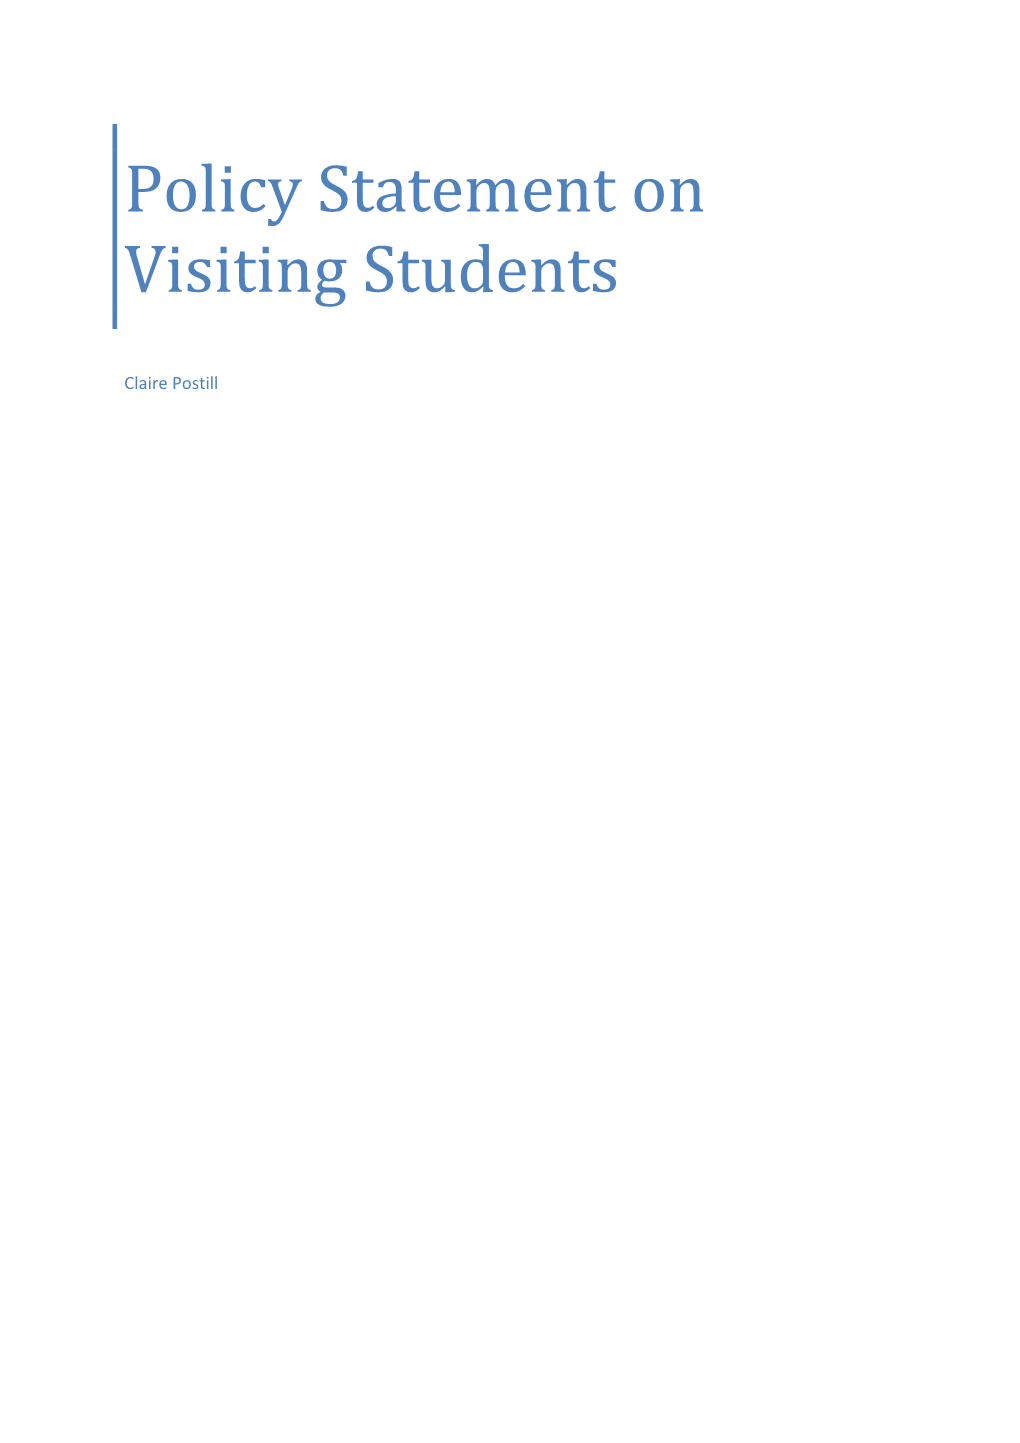 Policy Statement on Visiting Students